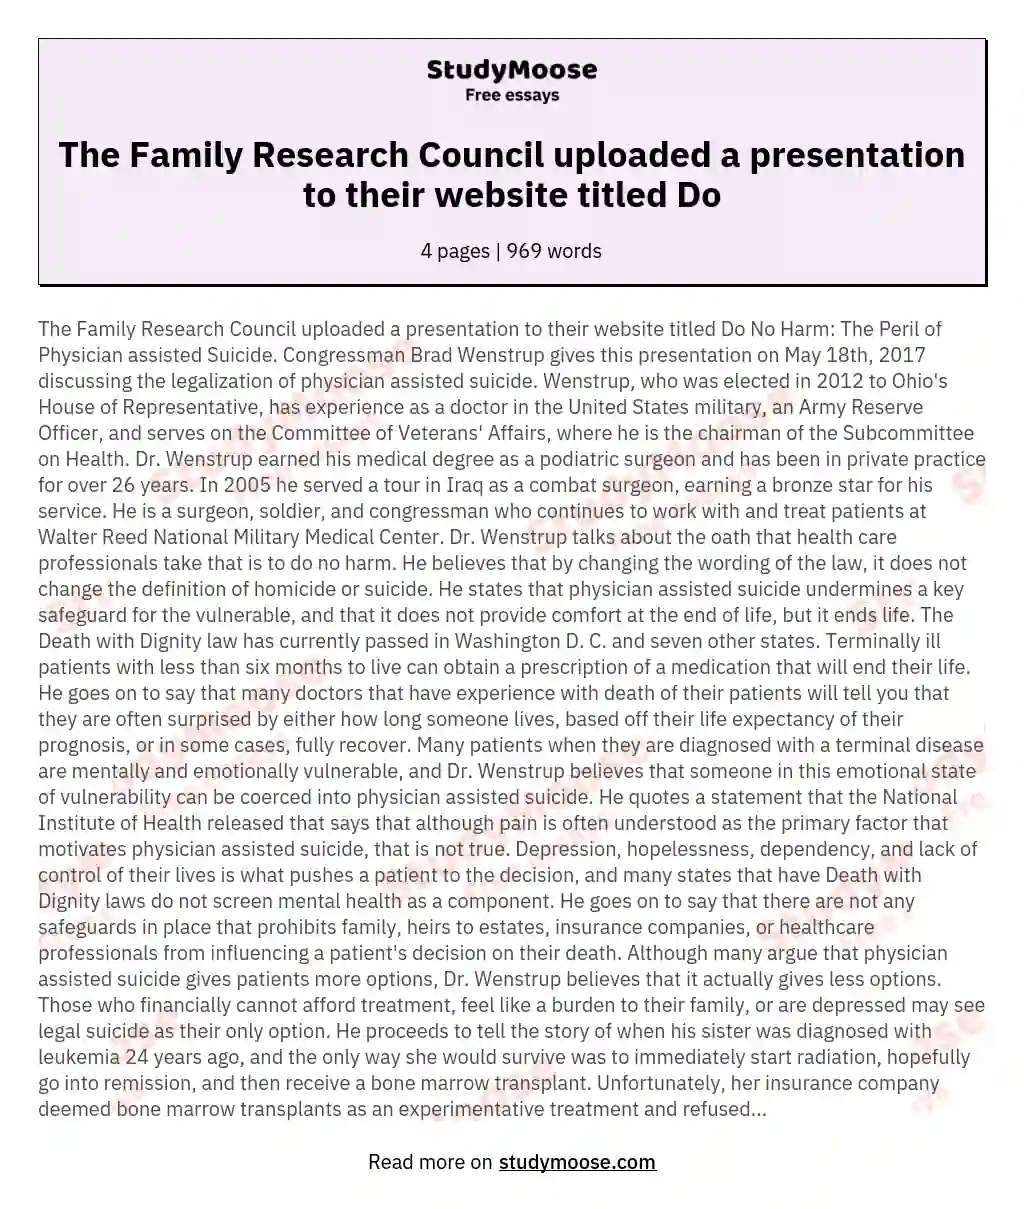 The Family Research Council uploaded a presentation to their website titled Do